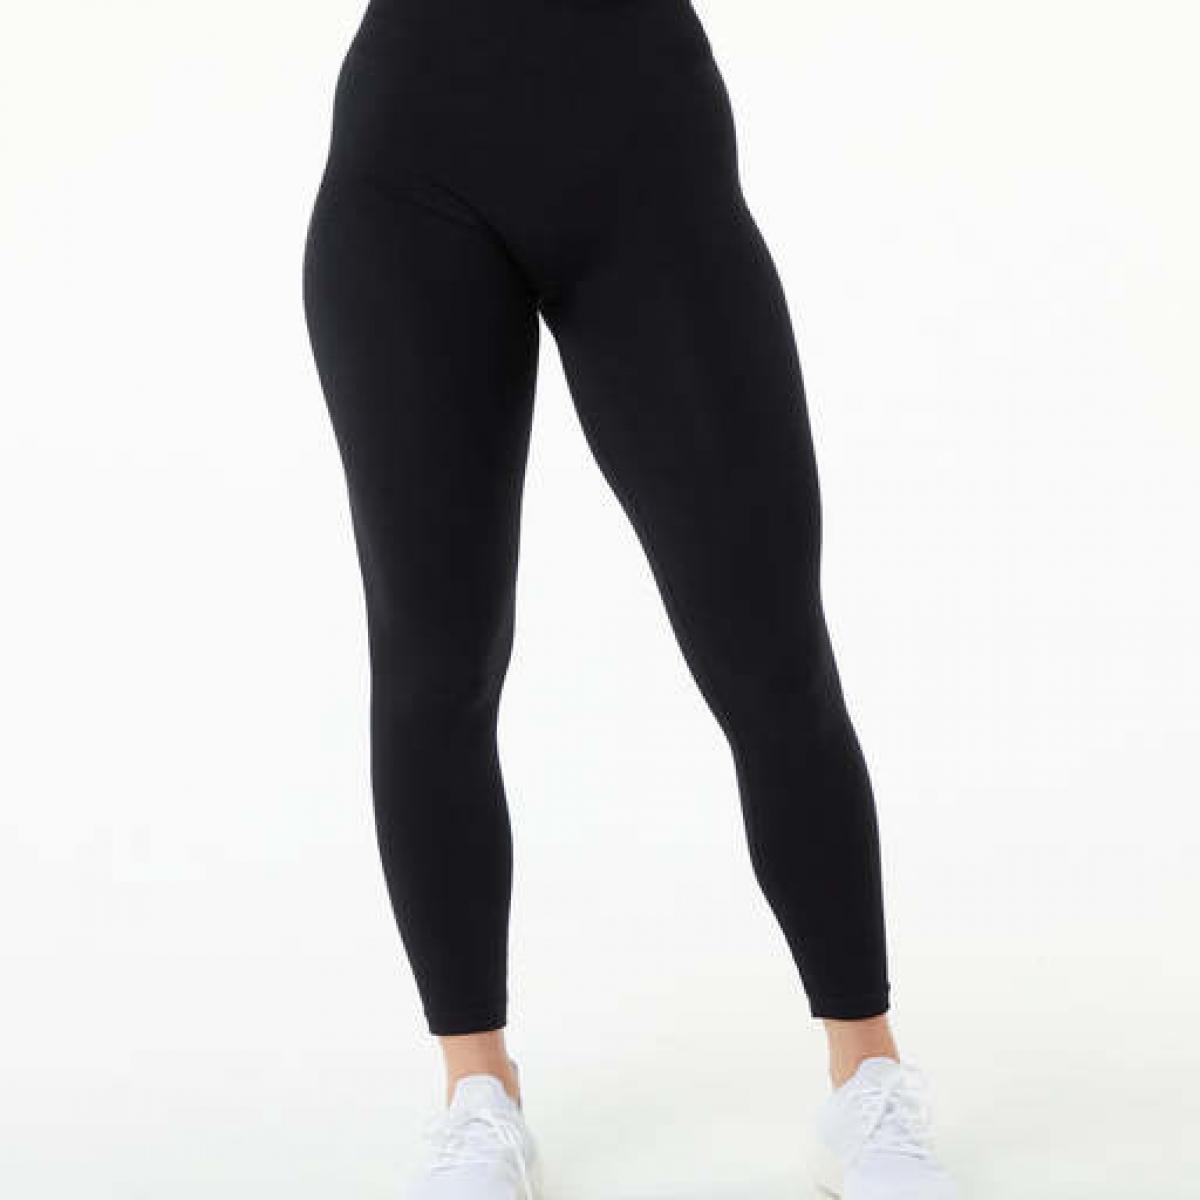 Alphalete Ozone Seamless Leggings Women Soft Workout Tights Fitness Outfits  Yoga Pants High Waisted Gym Wear Spandex Leg size L Color Black